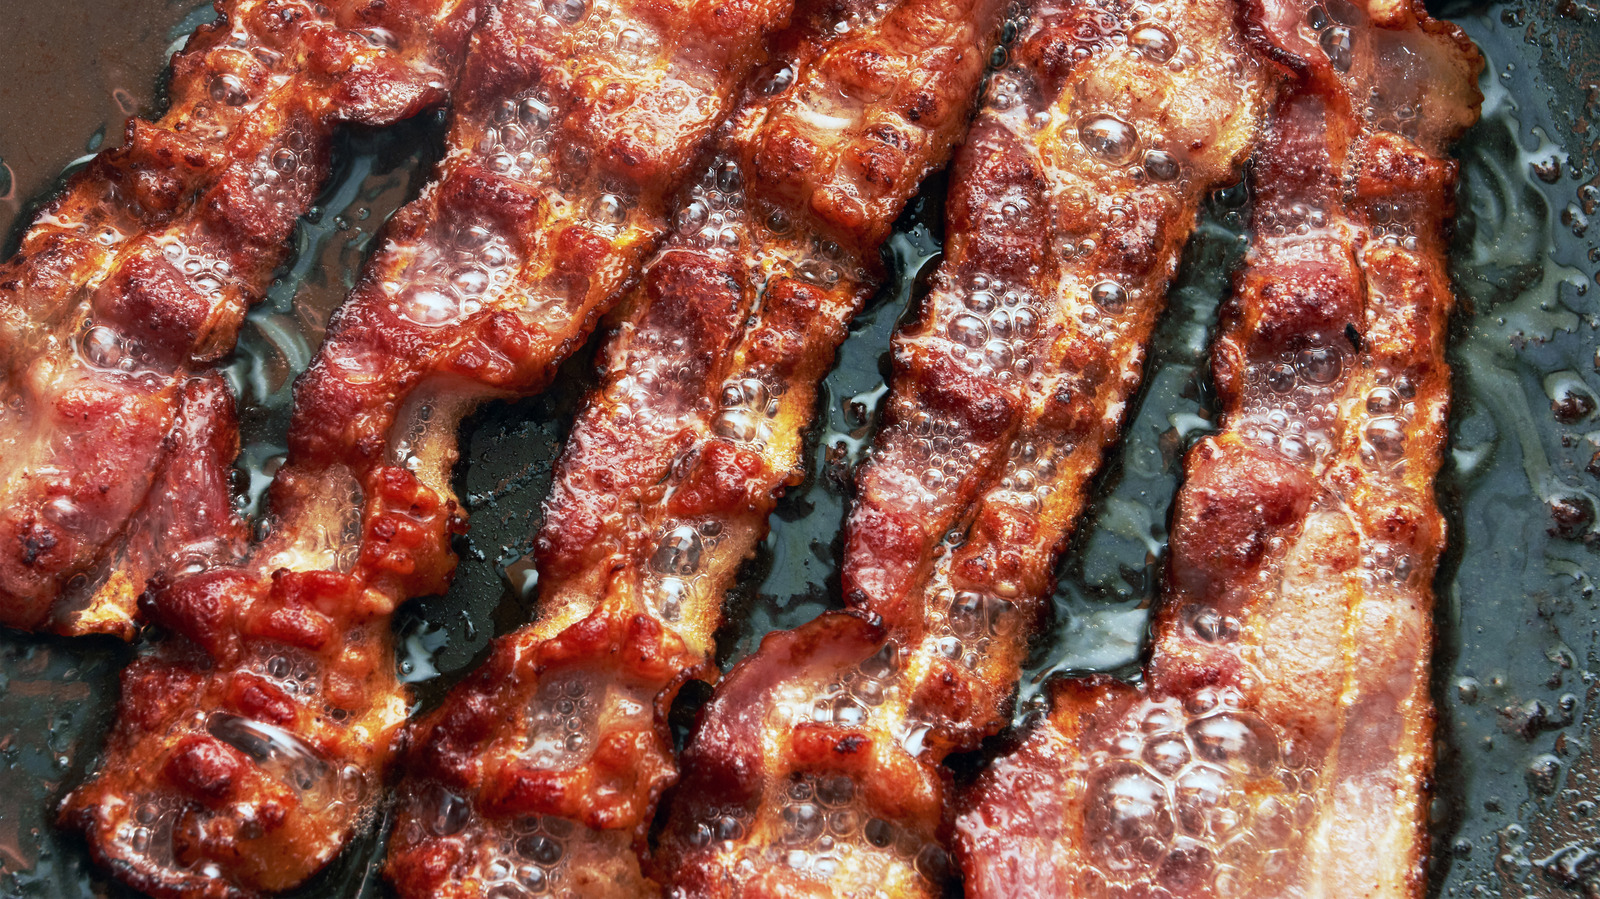 https://www.tastingtable.com/img/gallery/13-tips-you-need-to-cook-the-absolute-best-bacon/l-intro-1674669775.jpg